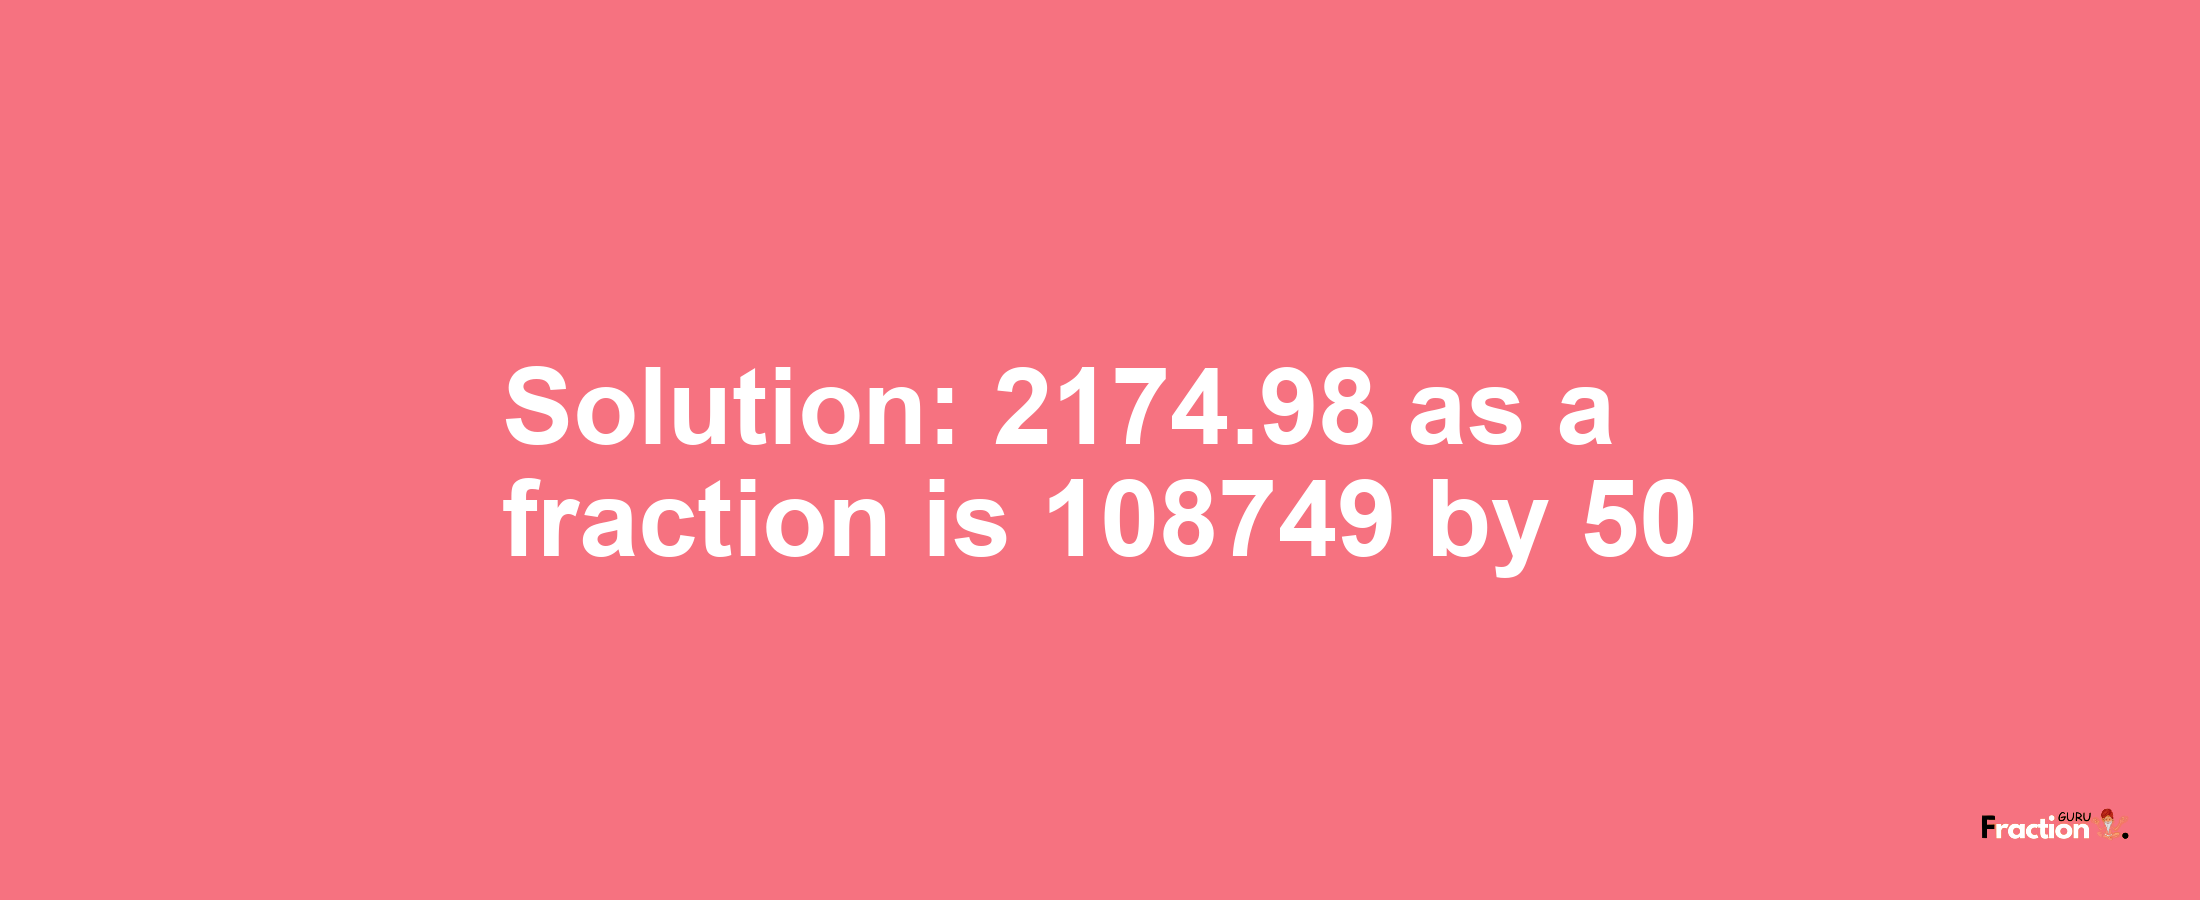 Solution:2174.98 as a fraction is 108749/50